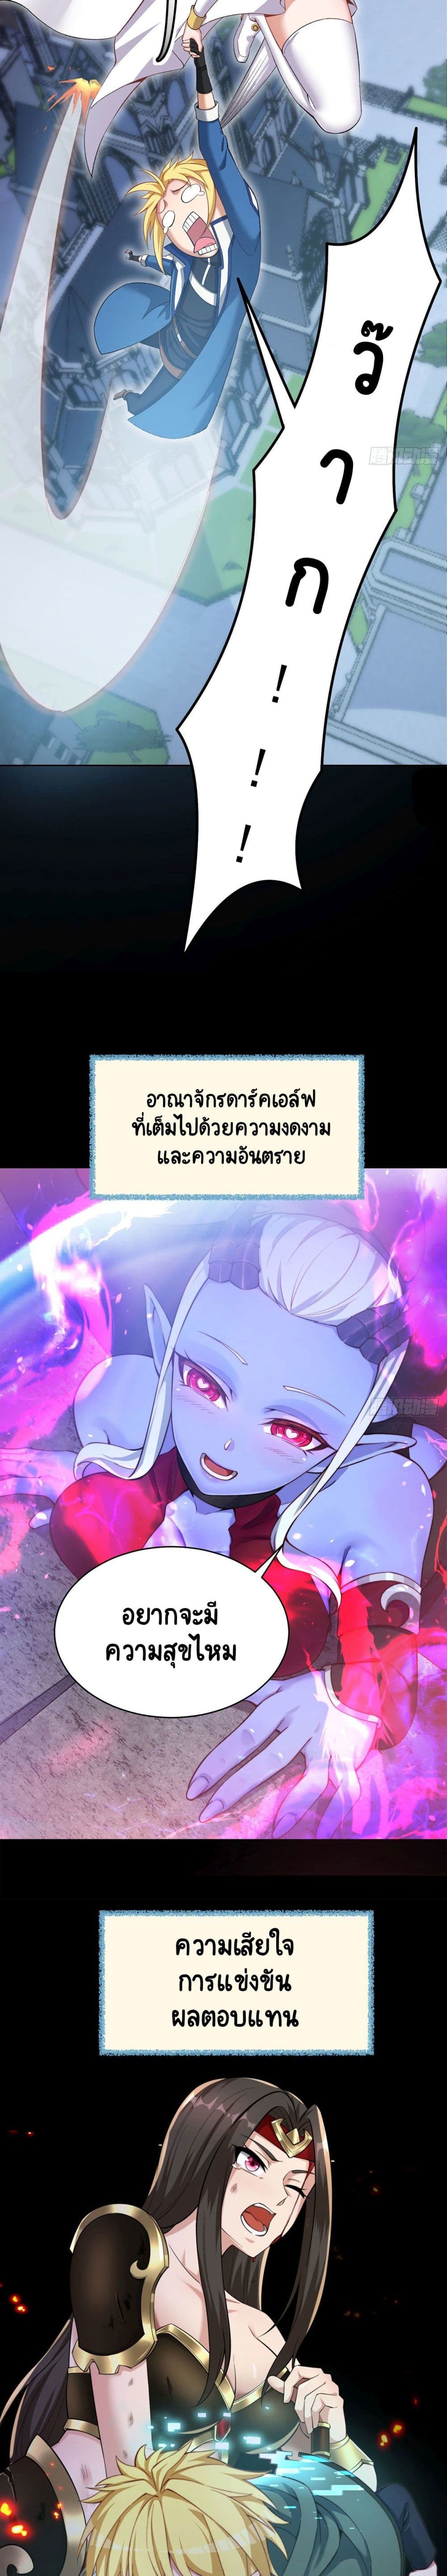 The Beta Server For A Thousand Years ตอนที่ 0. (4)